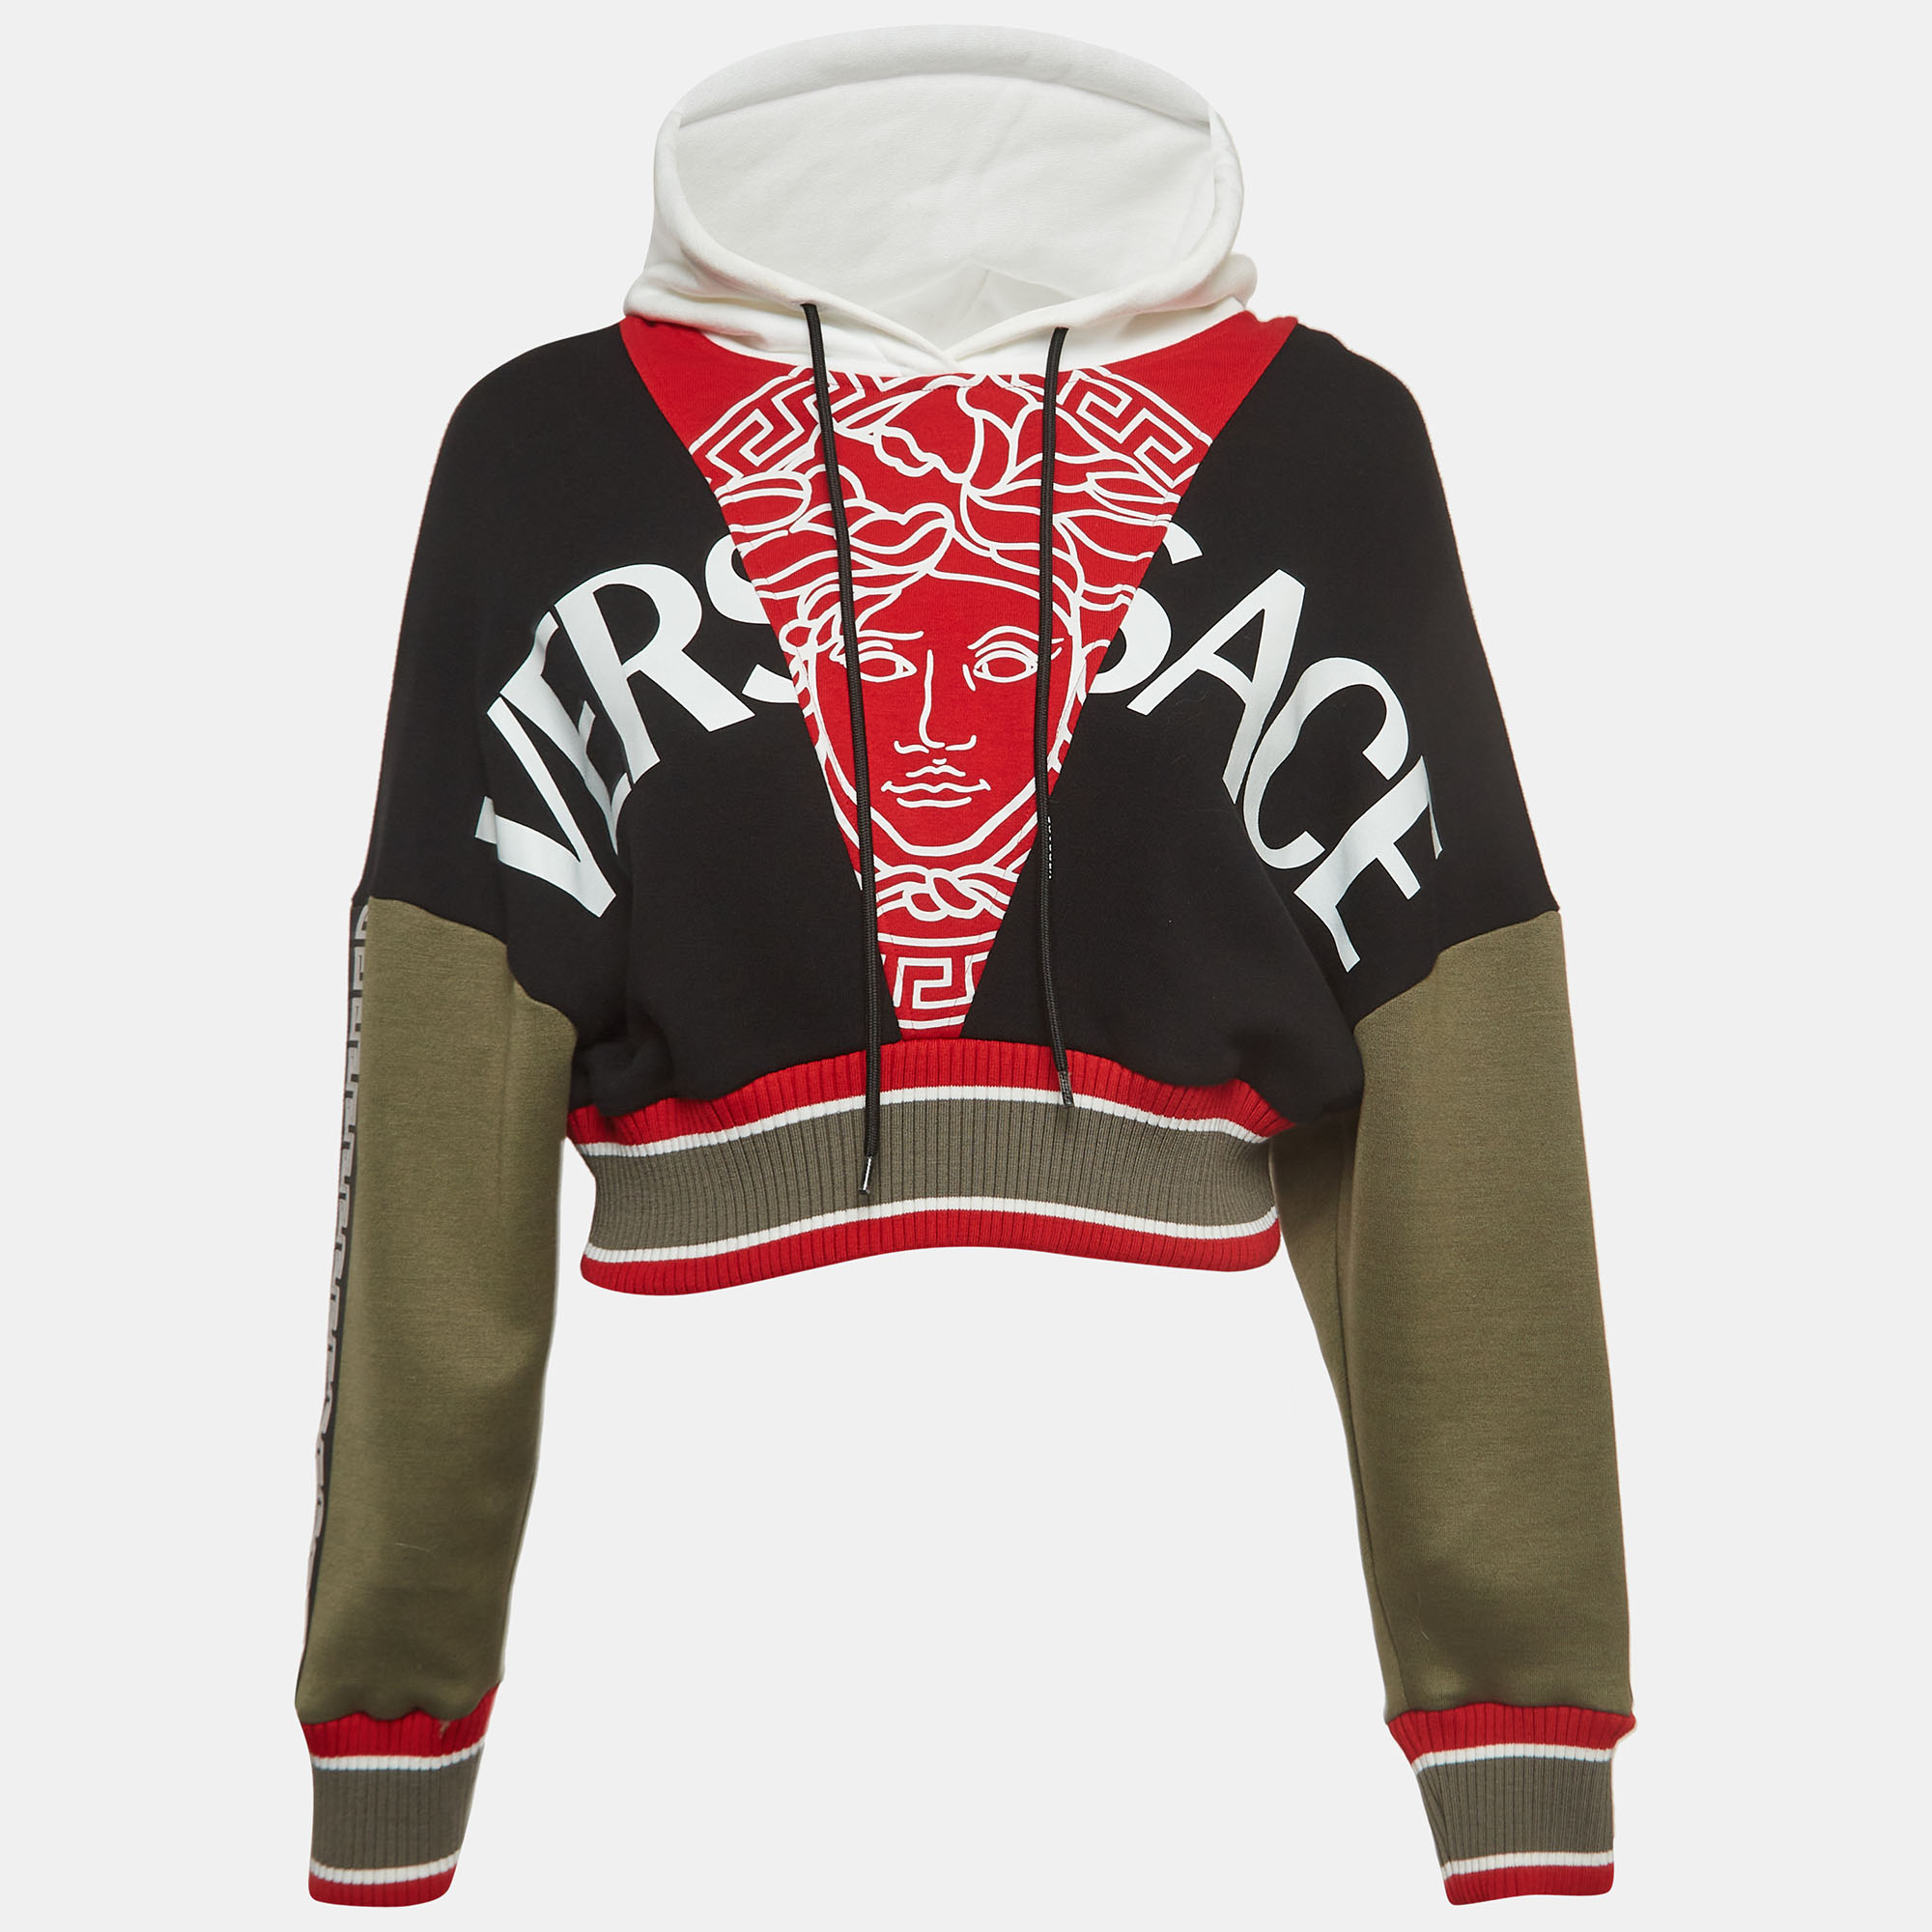 The Versace hoodie is a vibrant fashion statement featuring the iconic Versace logo in a lively spectrum. Crafted from a comfortable cotton blend it combines luxury style and a trendy cropped silhouette.